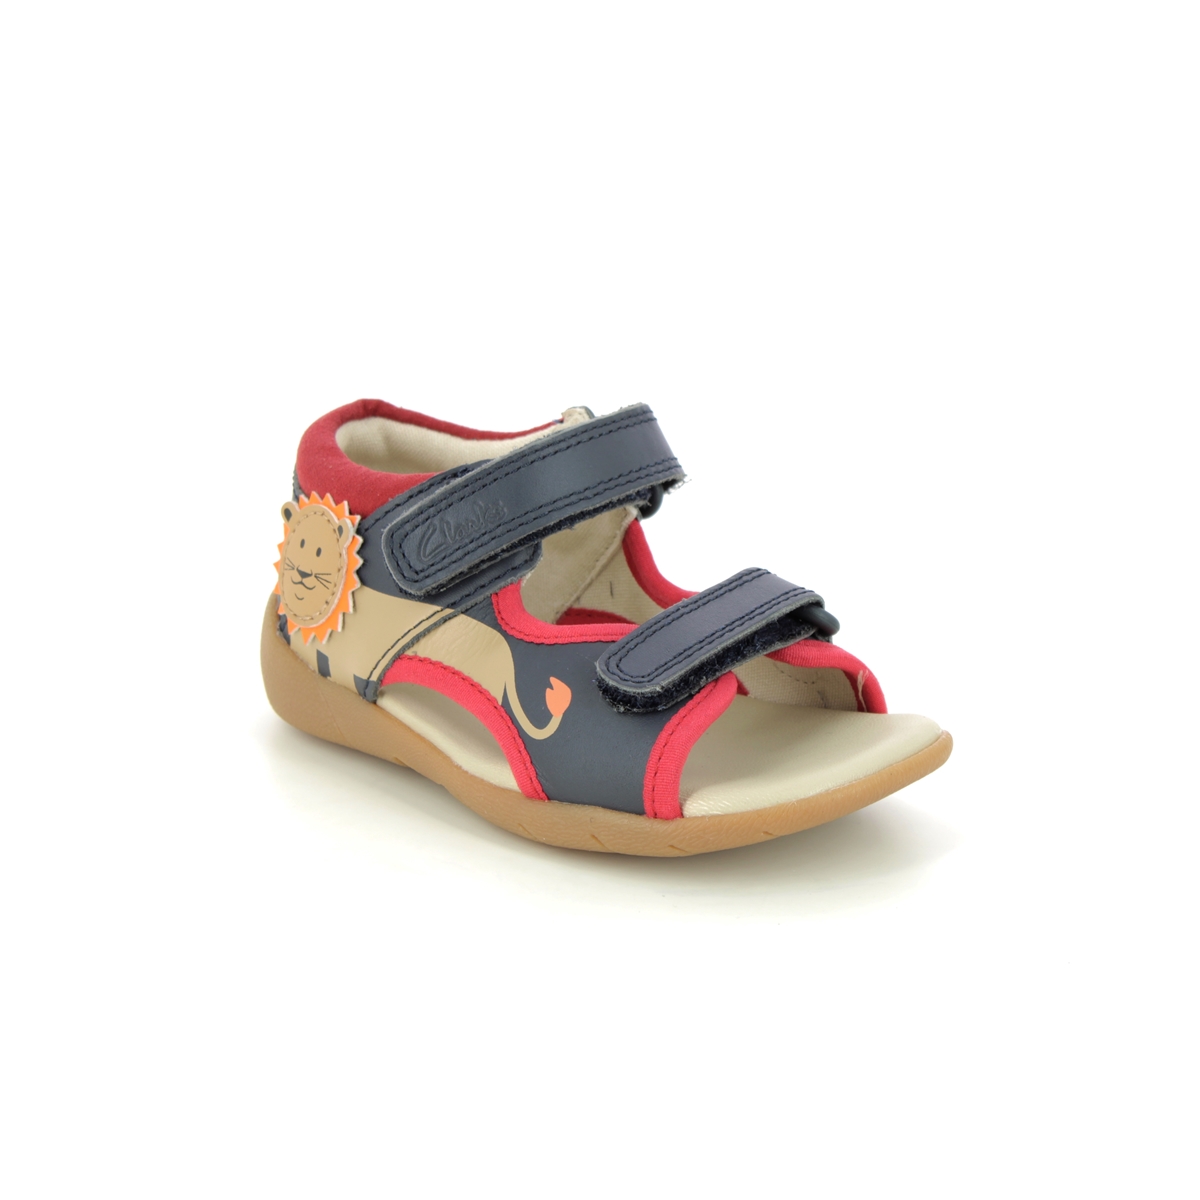 Clarks Zora Jungle T Navy leather Kids Boys Sandals 6462-16F in a Plain Leather in Size 6.5